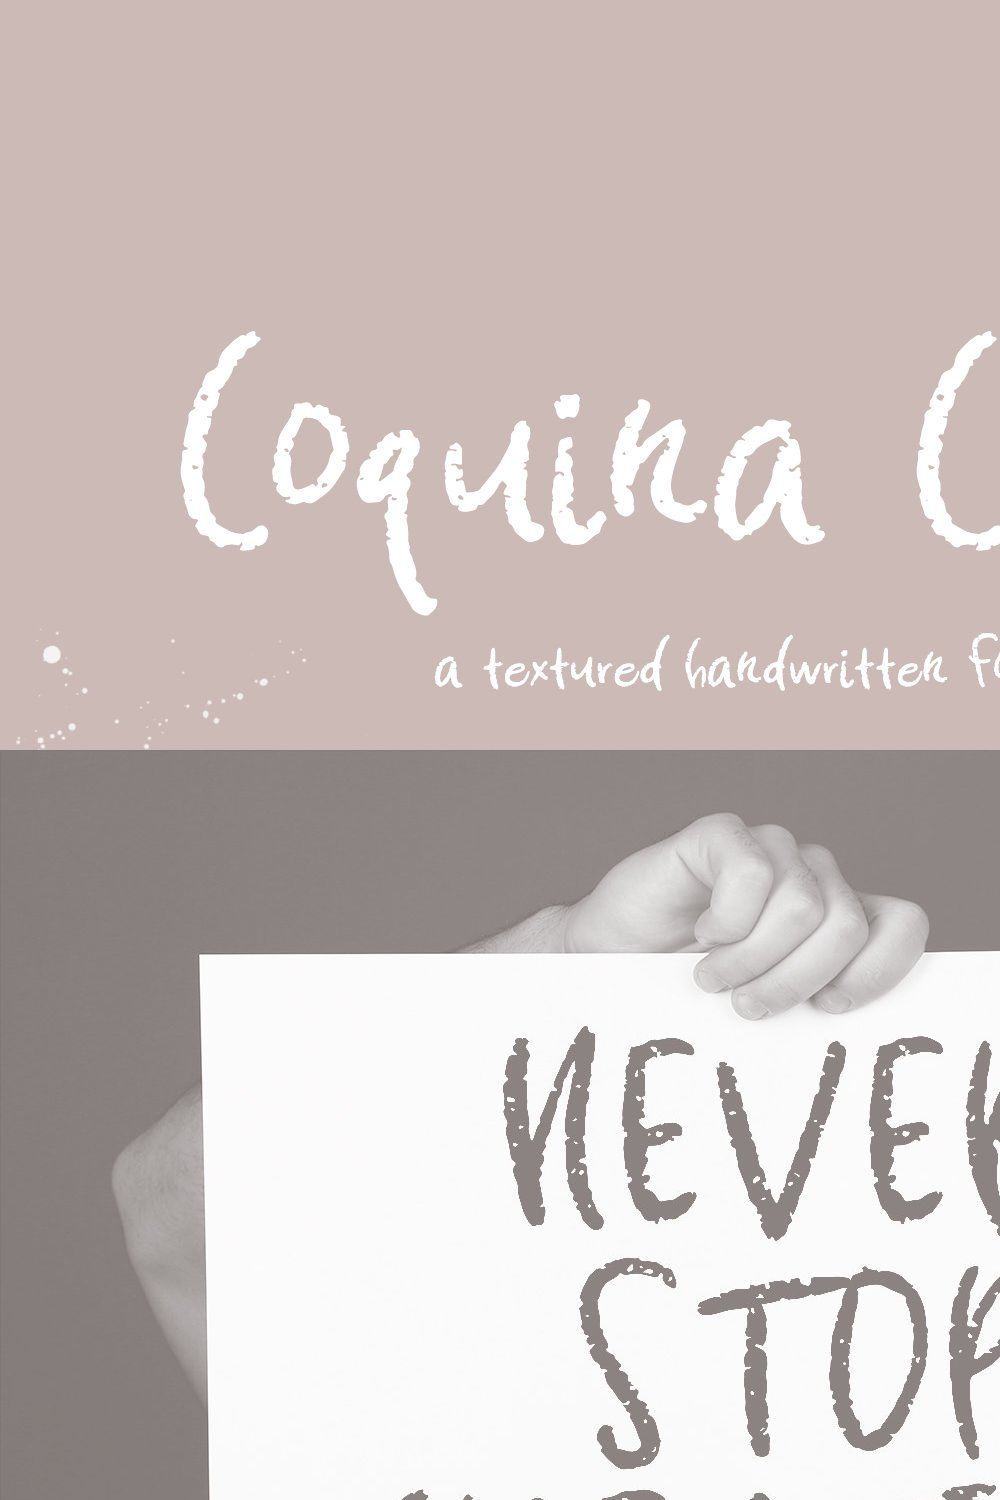 Coquina Clam Hand-lettered Font pinterest preview image.